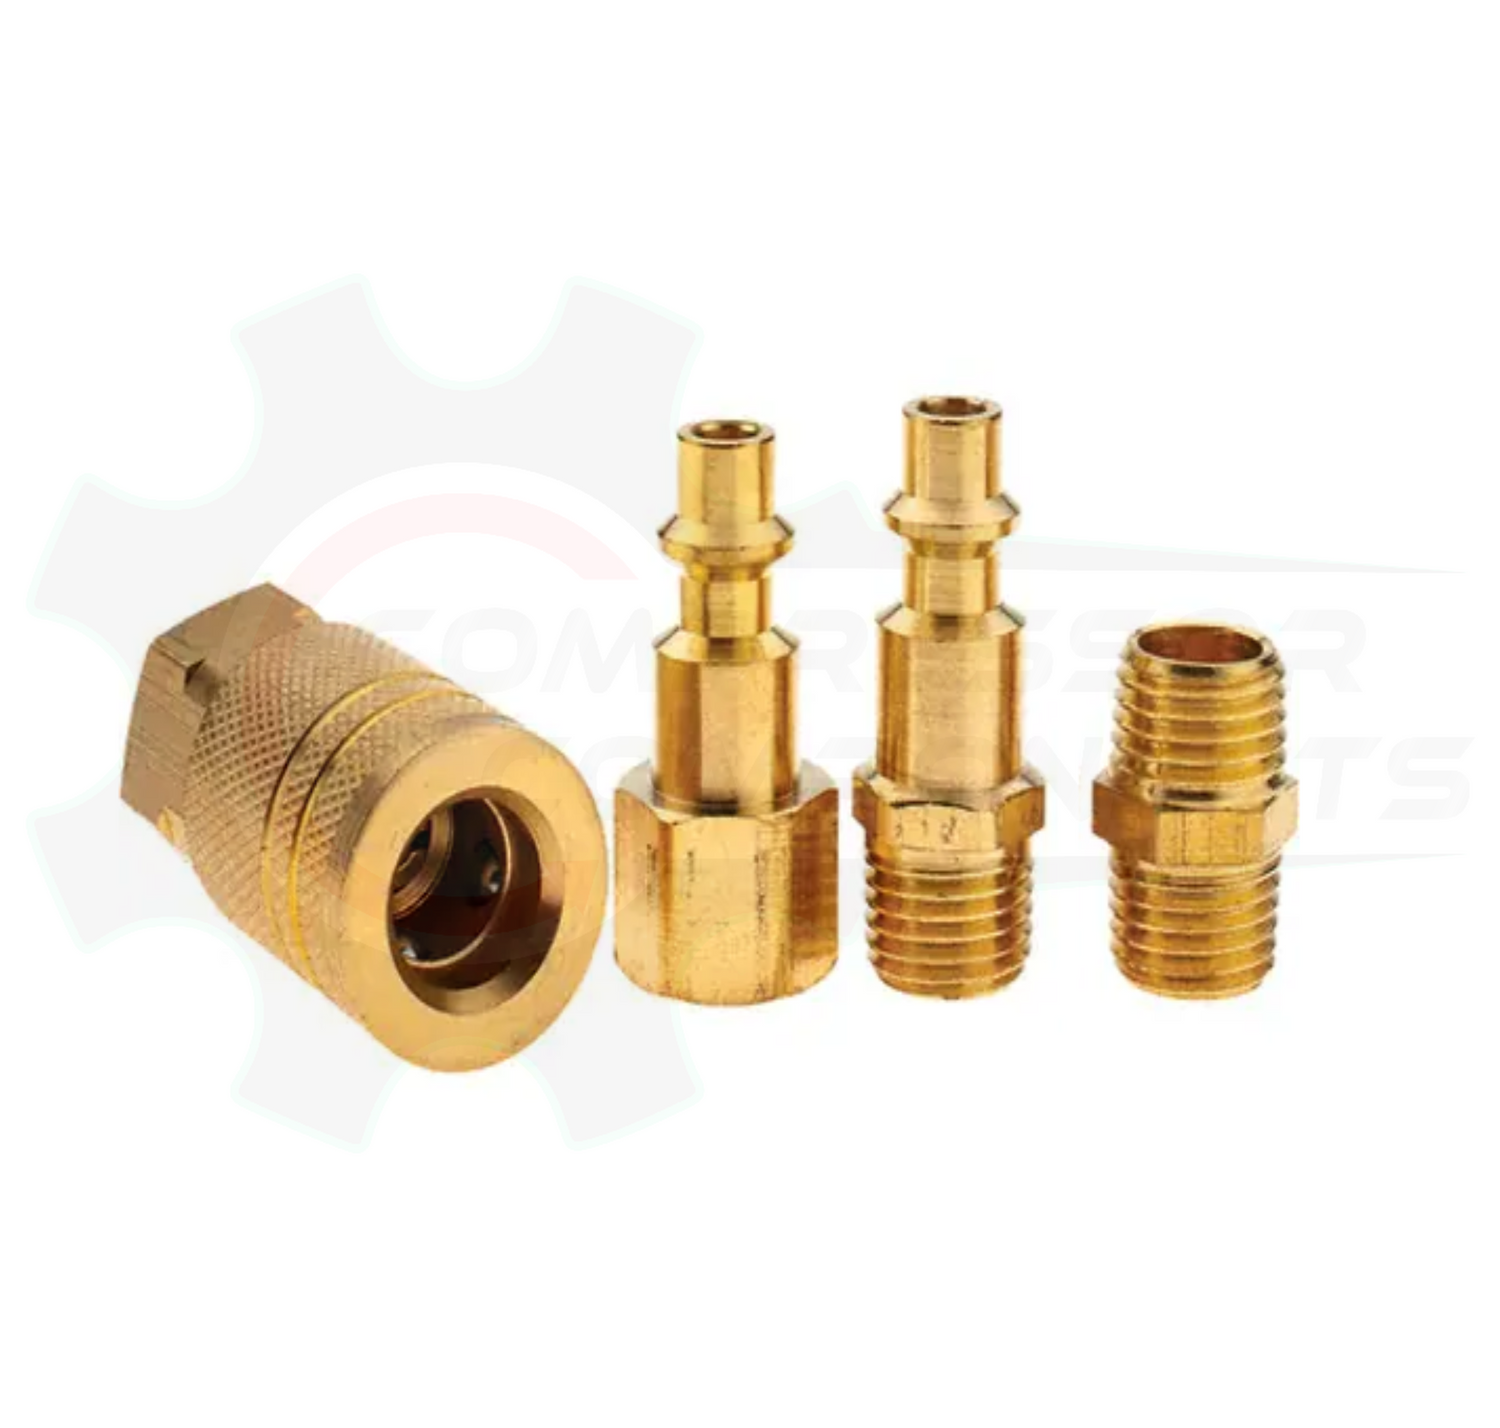 Industrial Couplers and Plugs Sets